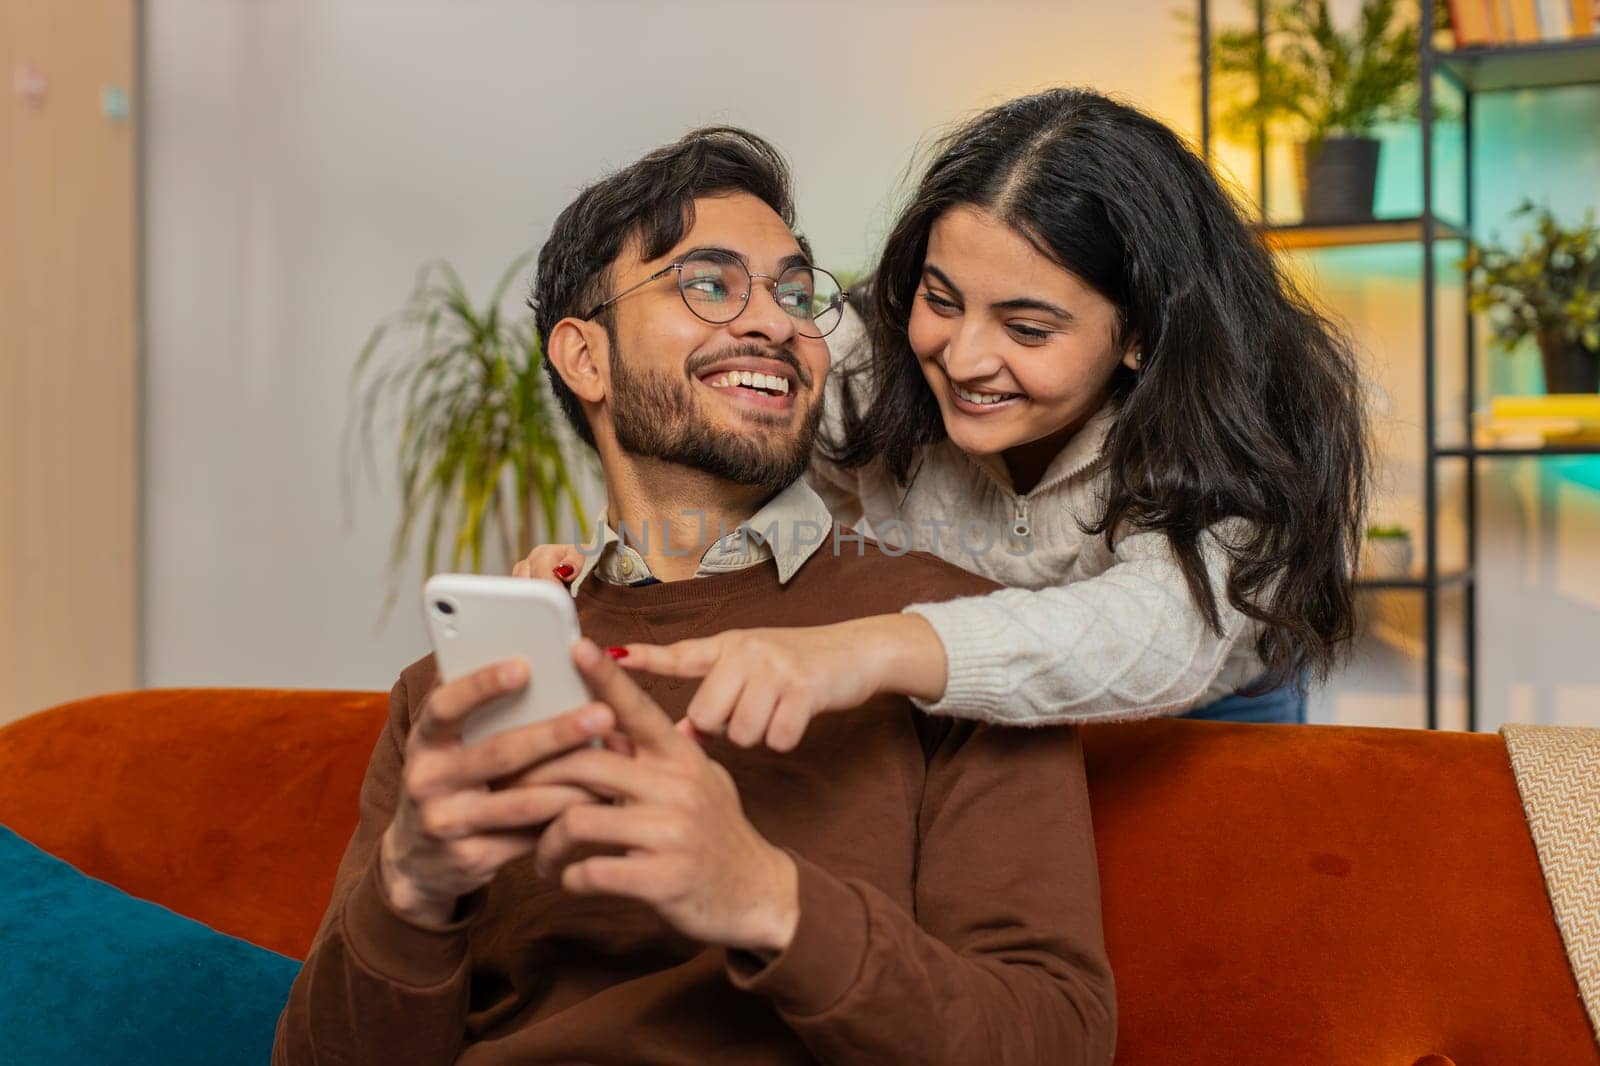 Smiling Arabian woman talking with boyfriend swiping smartphone sitting on sofa at home. Multiethnic young couple using mobile phone together making order online delivery in living room apartment.